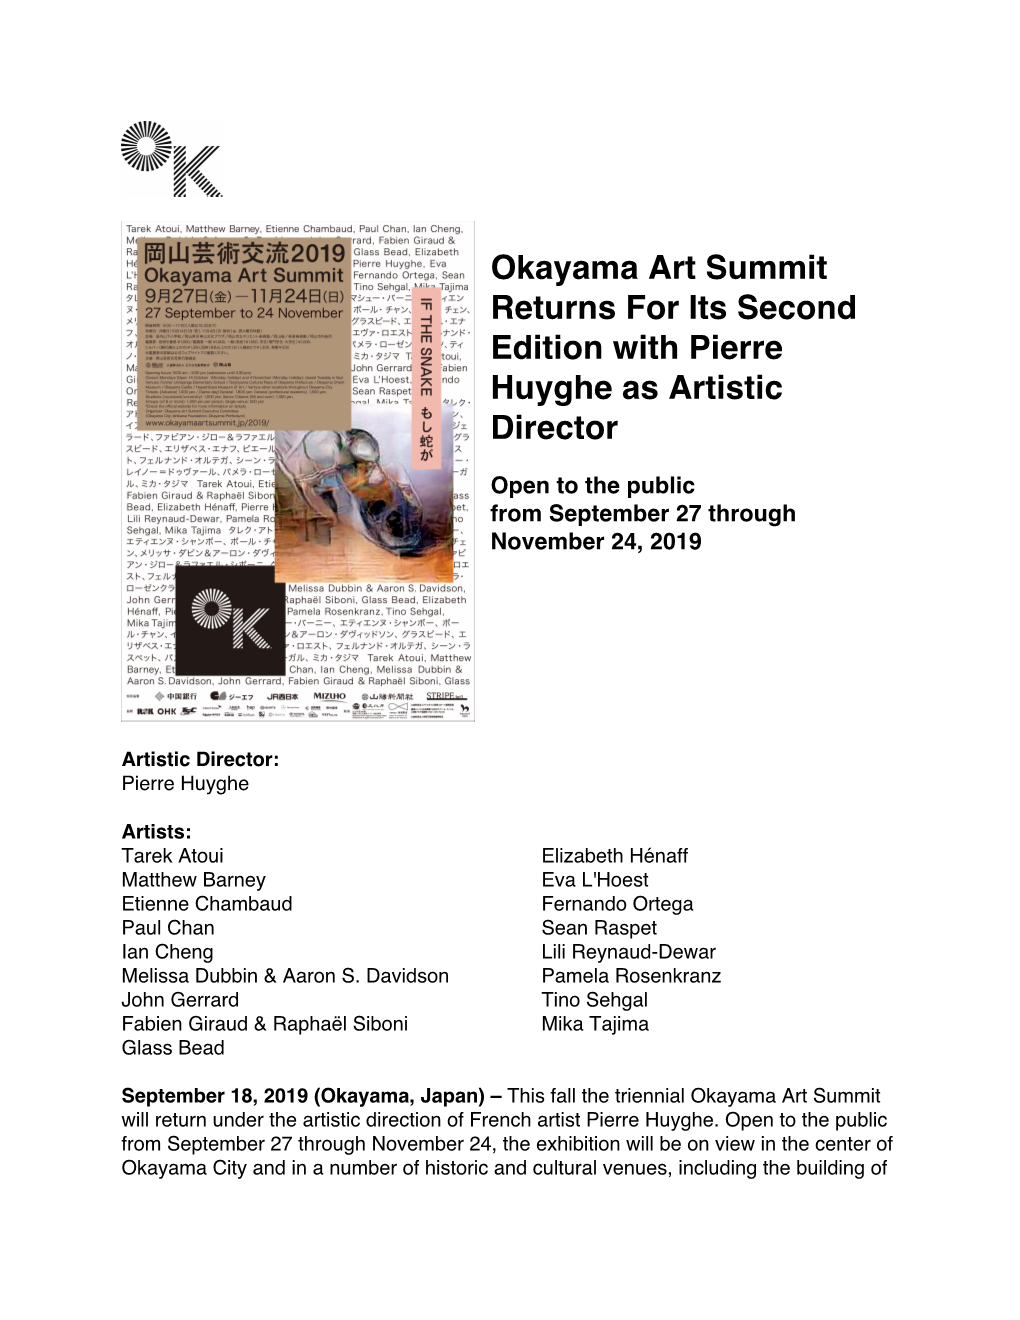 Okayama Art Summit Returns for Its Second Edition with Pierre Huyghe As Artistic Director